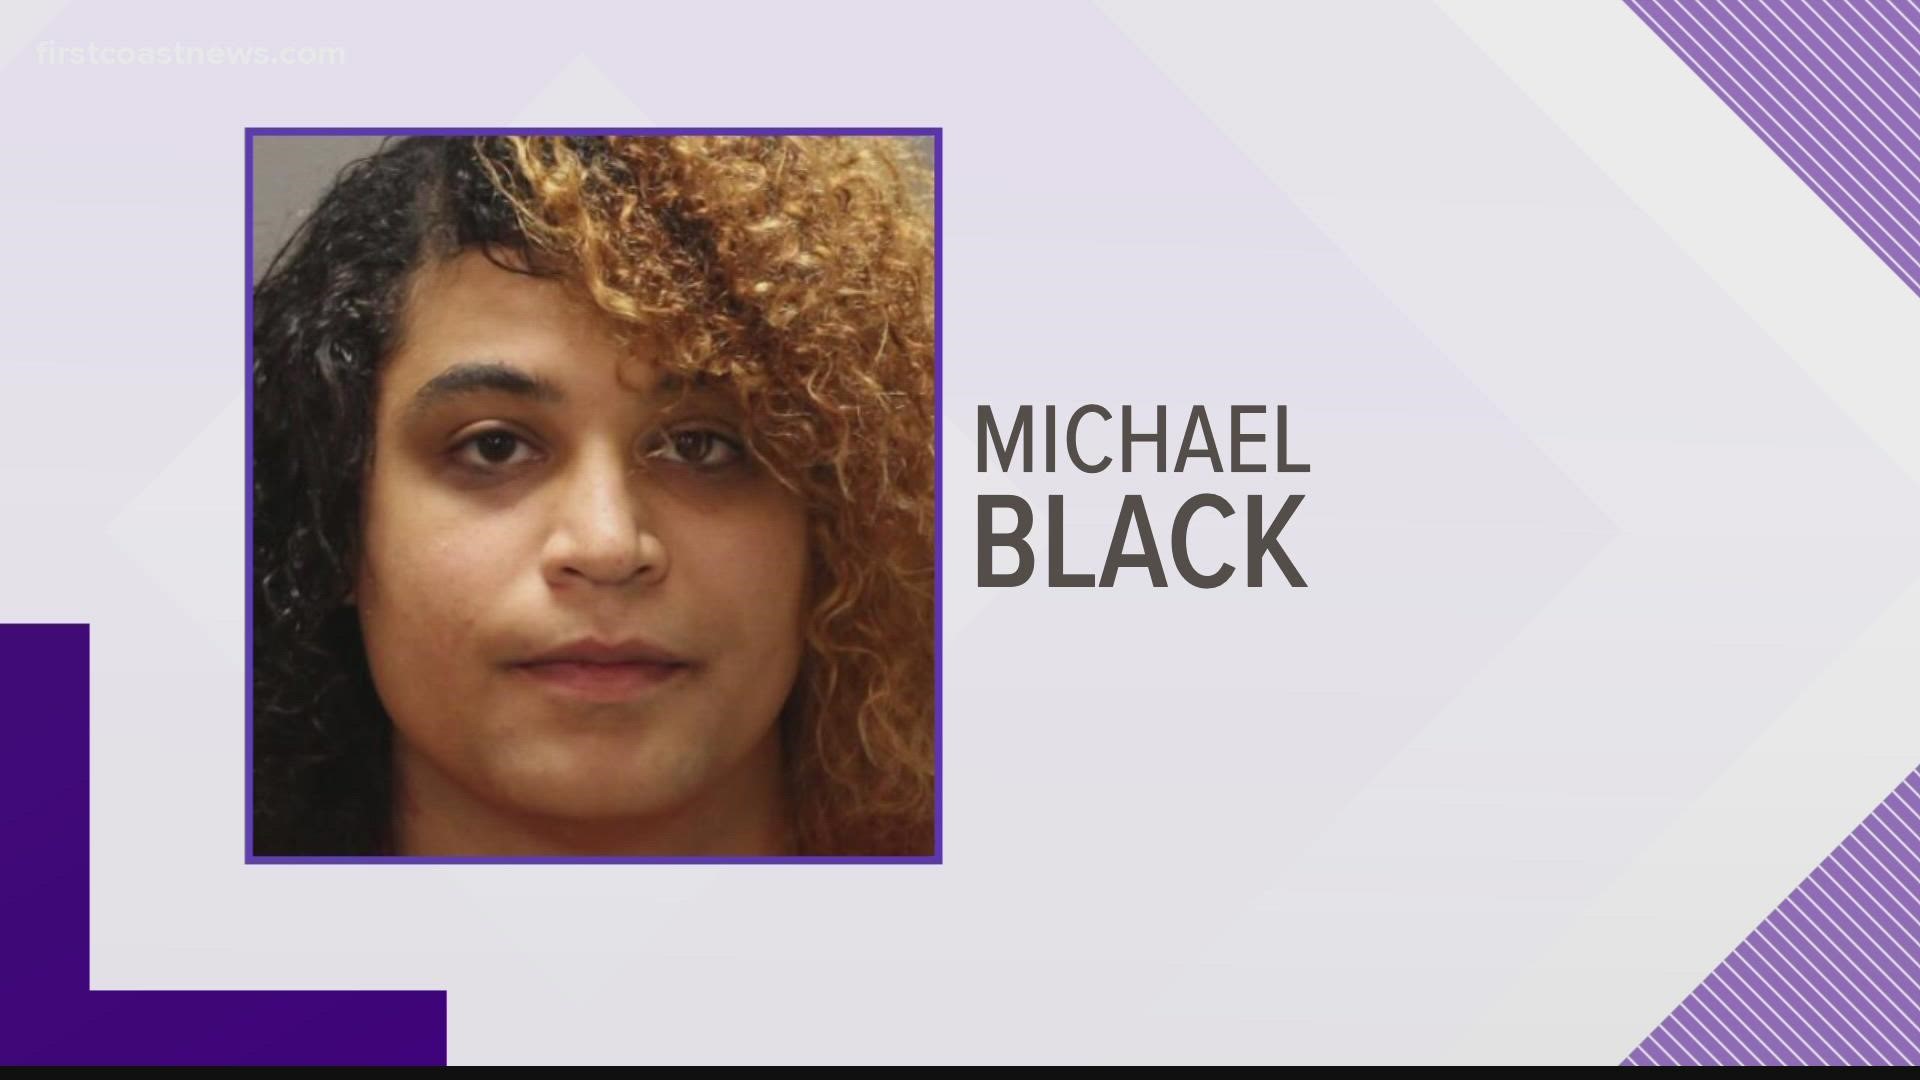 Michael Black was arrested earlier this week for child pornography, according to the Jacksonville Sheriff's Office.